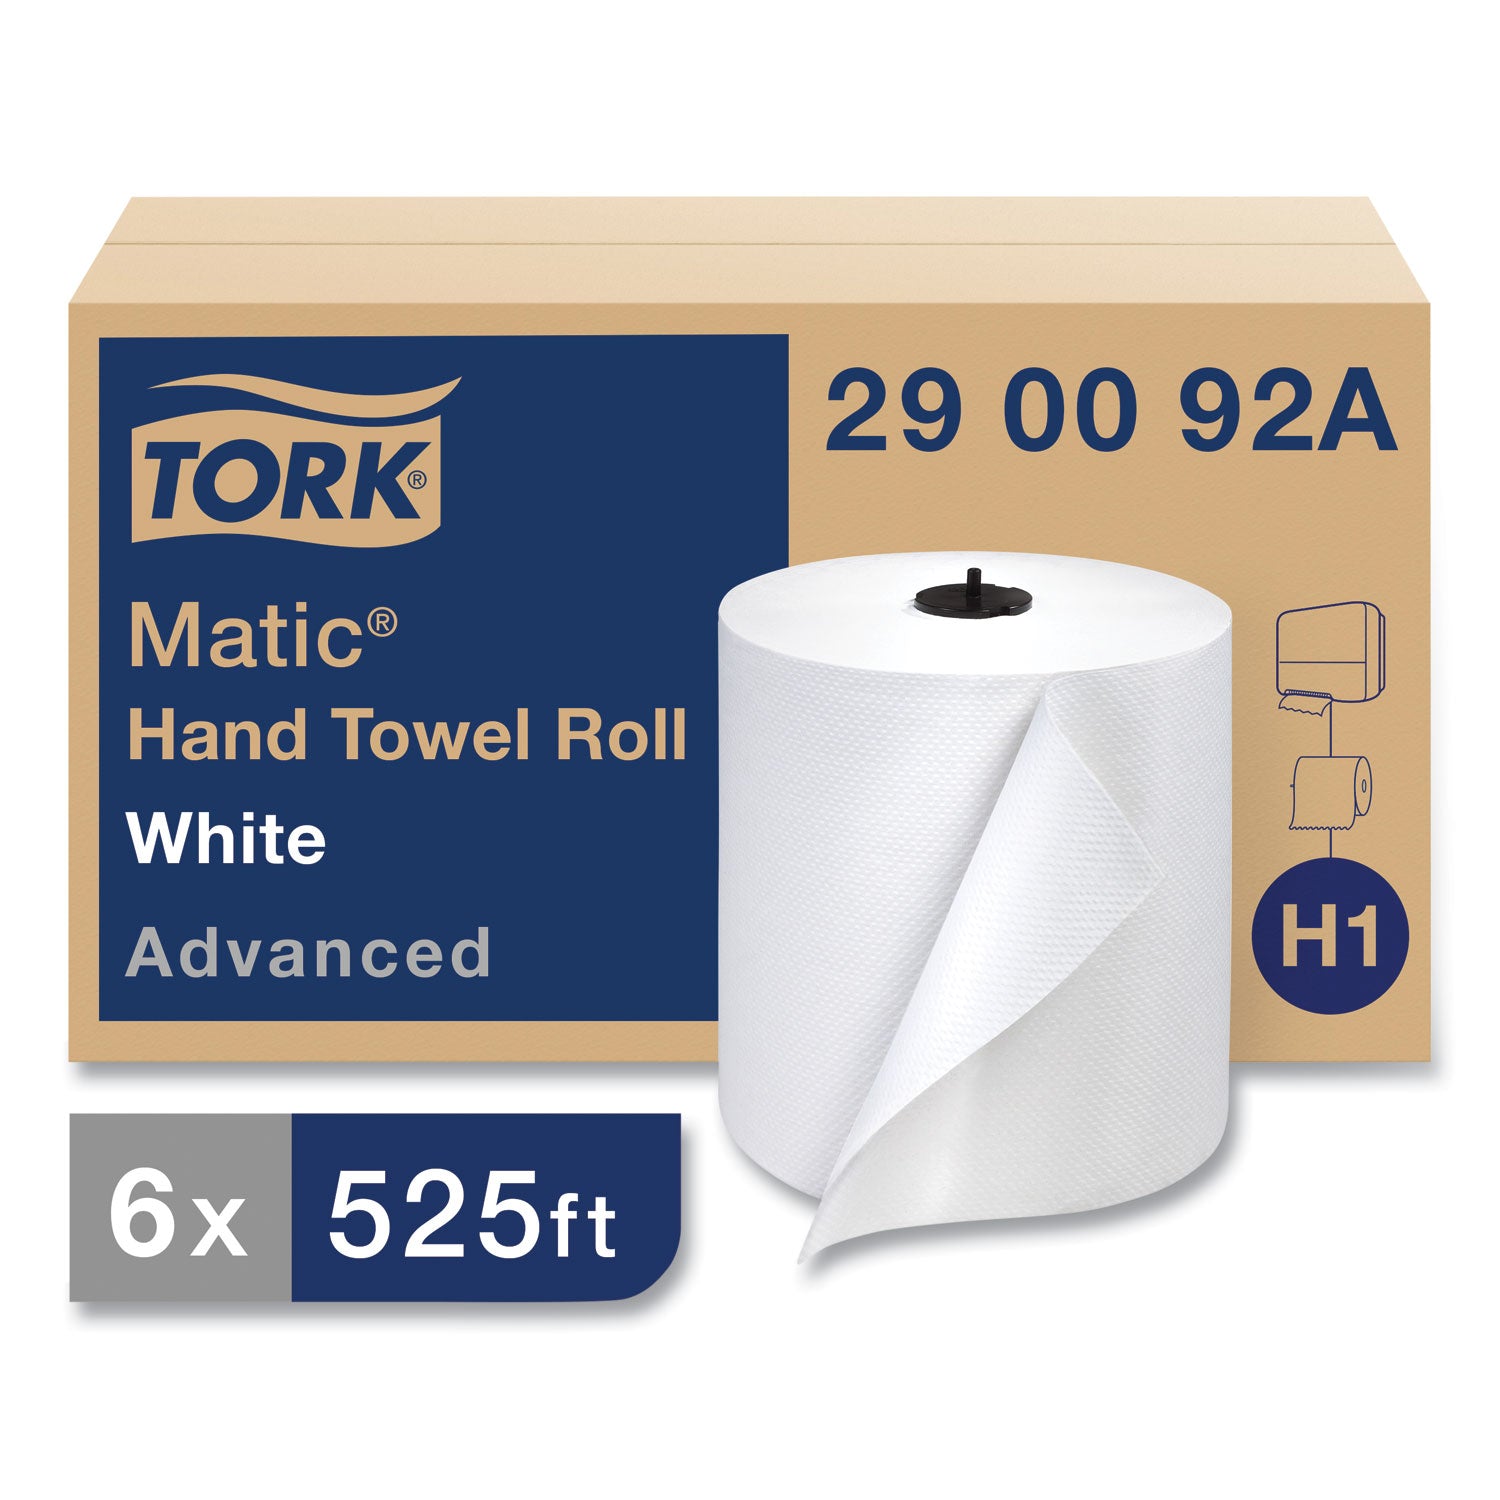 advanced-matic-hand-towel-roll-2-ply-77-x-525-ft-white-643-roll-6-rolls-carton_trk290092a - 1